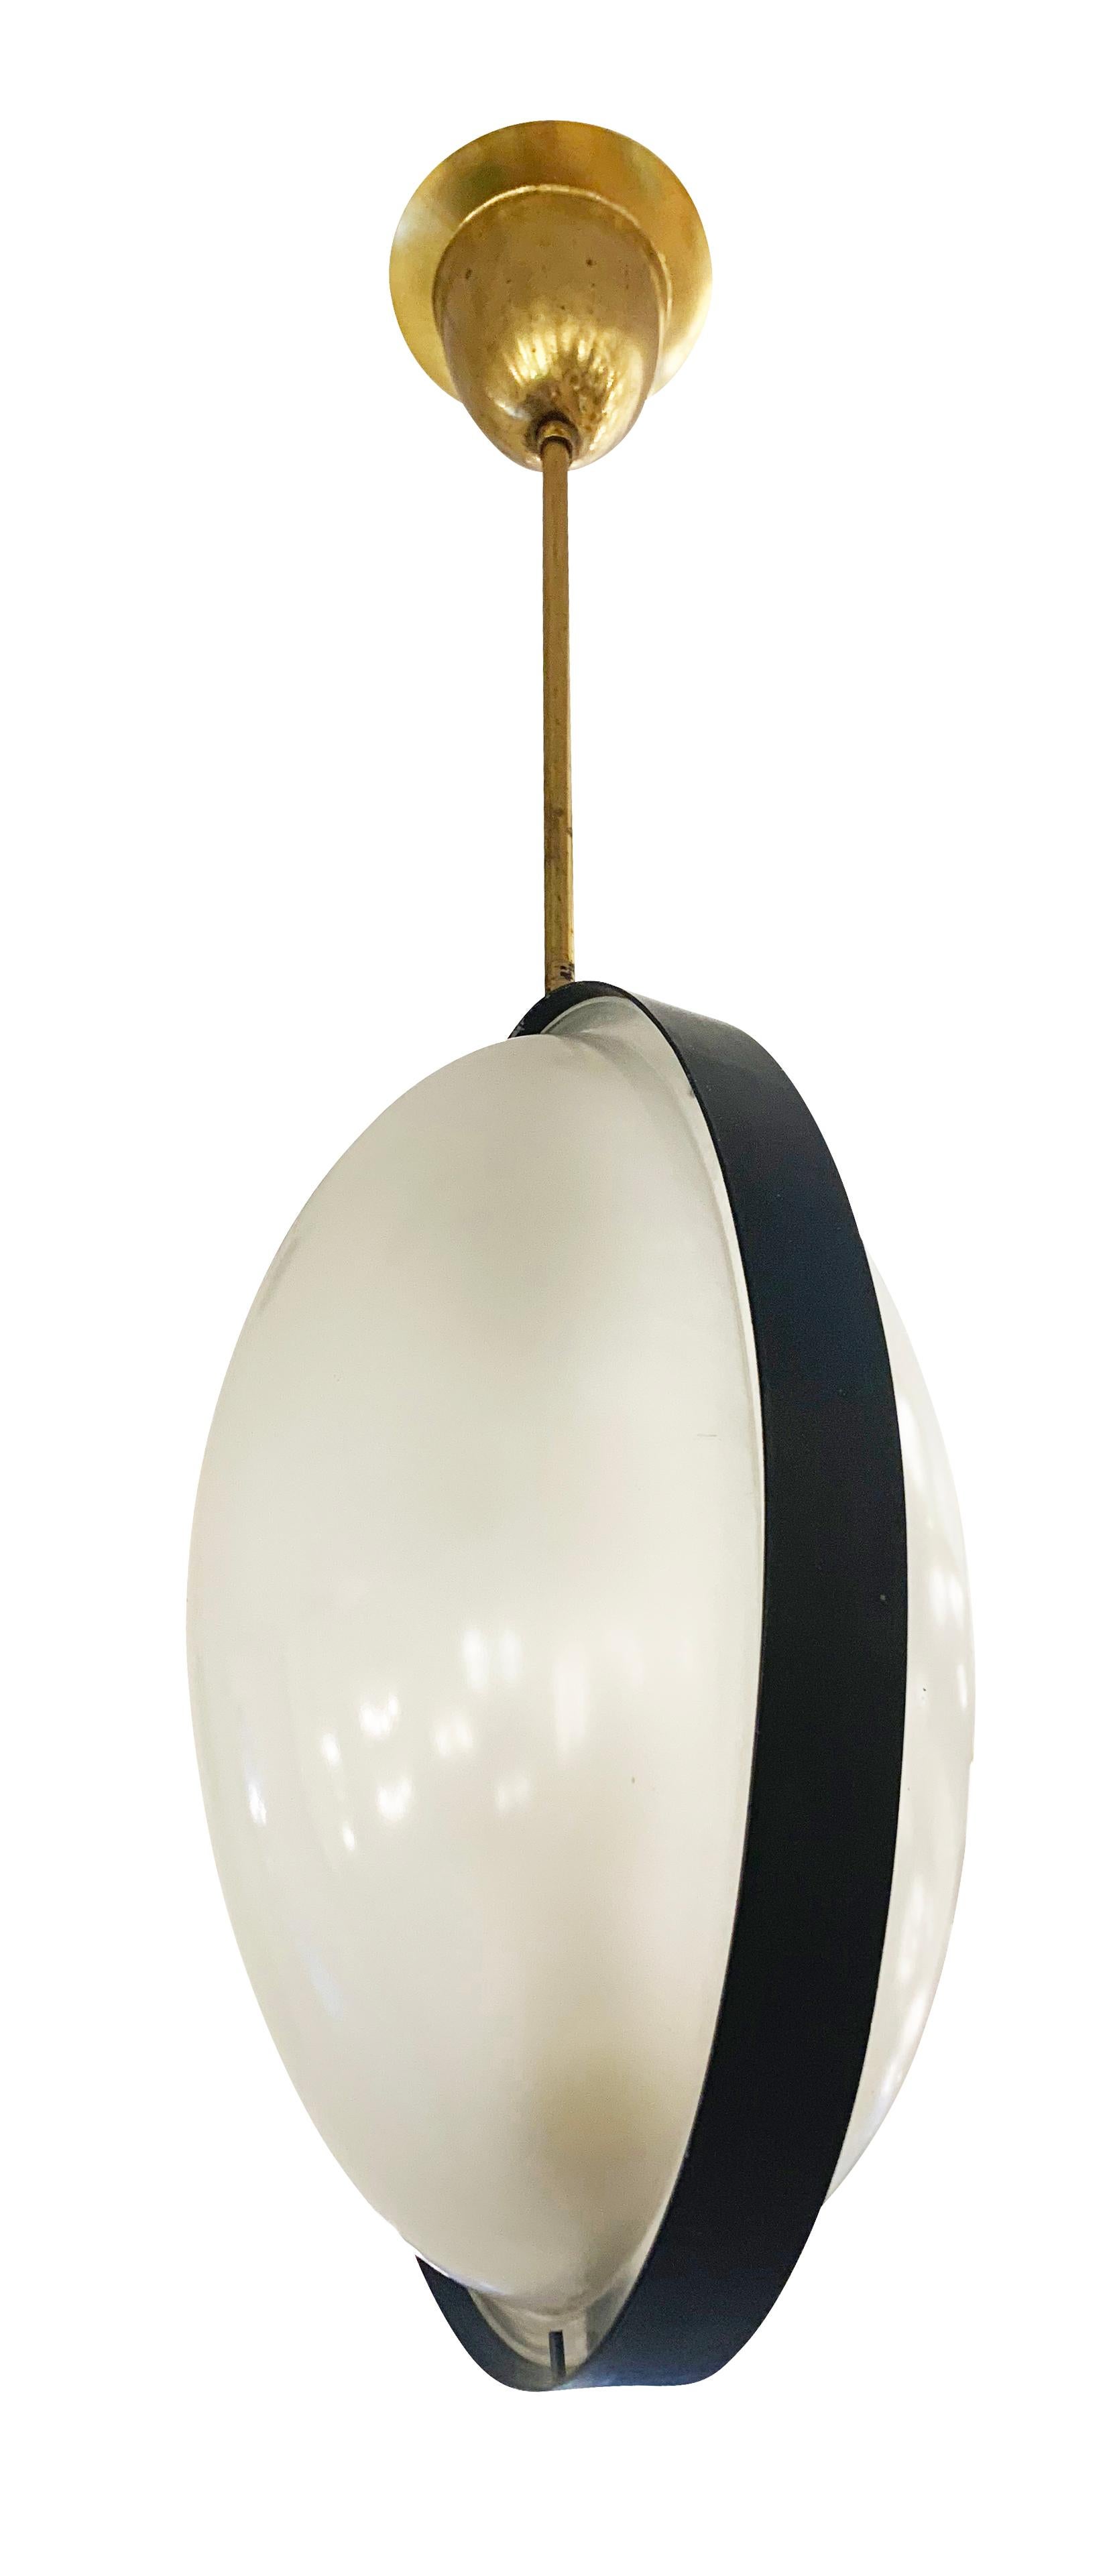 Italian Mid-Century oval pendant with two frosted glass diffusers divided by a black lacquered frame. Brass stem and canopy. Holds two light sources. Height of stem can be adjusted as needed.

Condition: Excellent vintage condition, minor wear